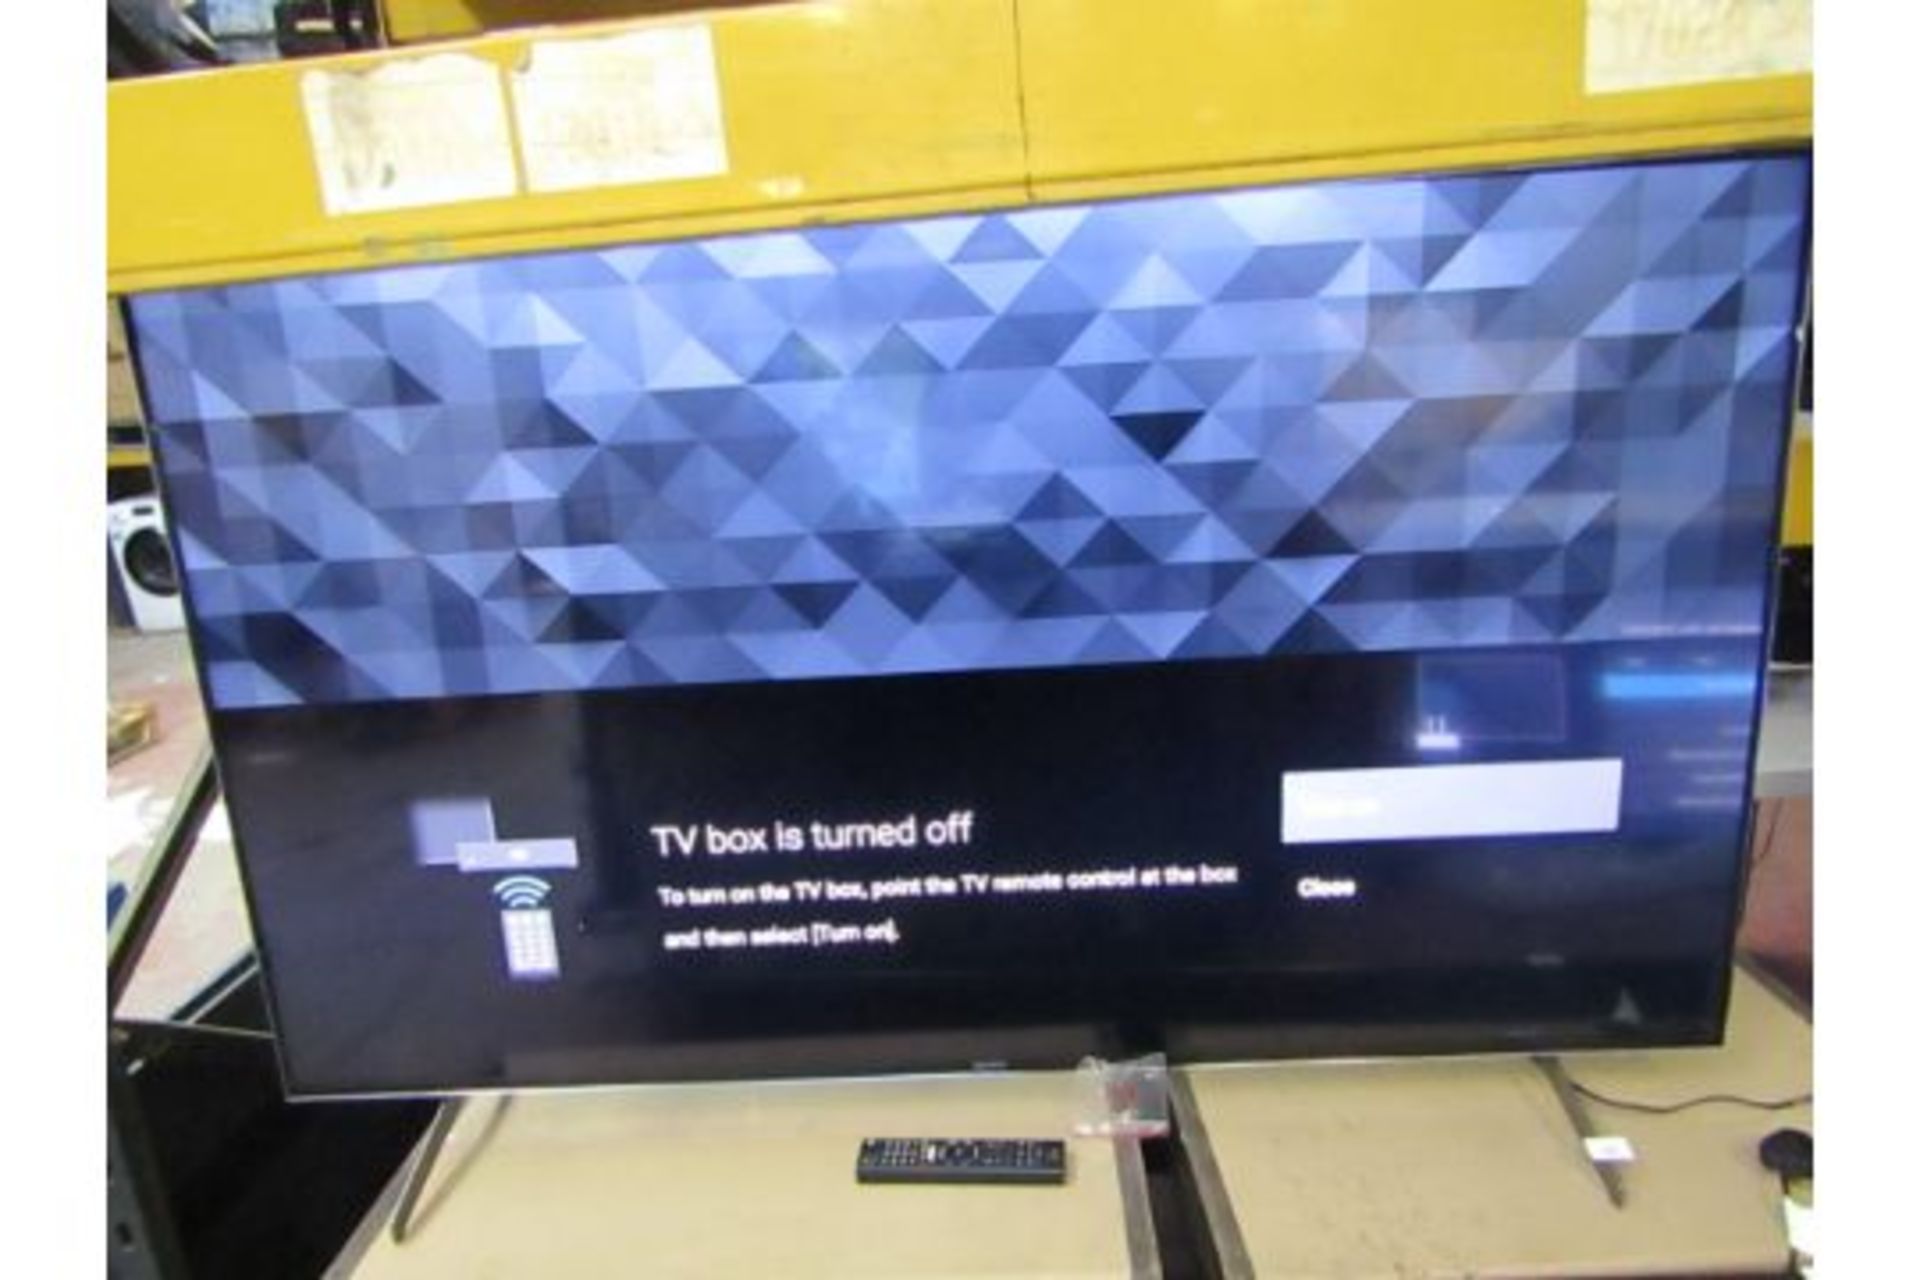 Sony KD65XH9005BU Bravia 65" Full Array LED 4K HDR Android TV, tested working and boxed. RRP œ1499.